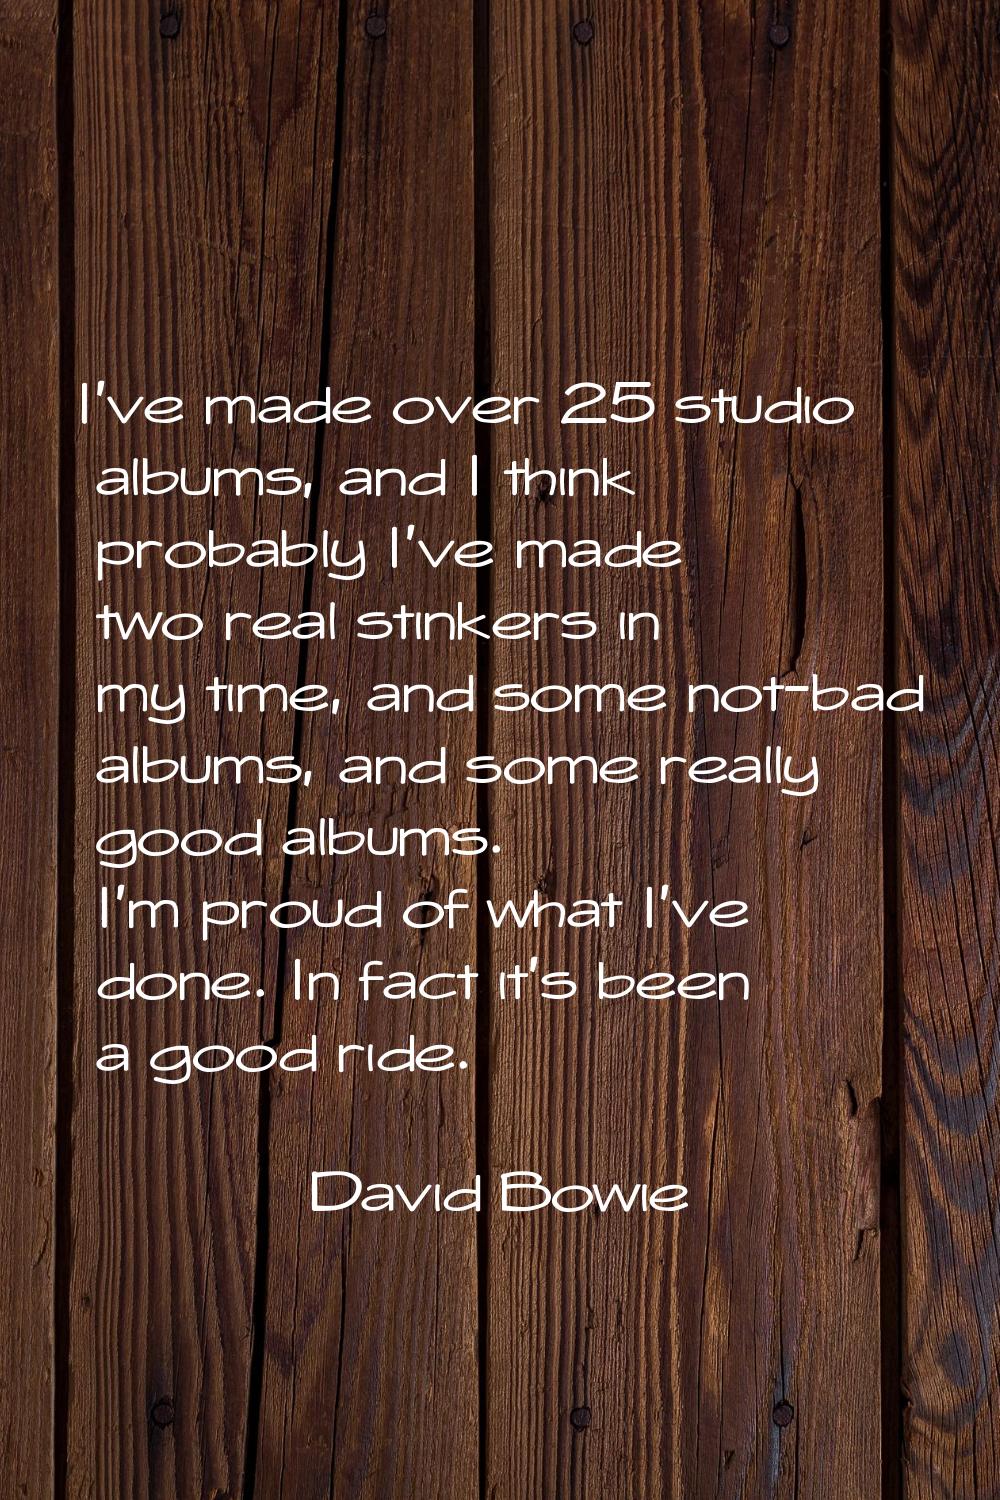 I've made over 25 studio albums, and I think probably I've made two real stinkers in my time, and s